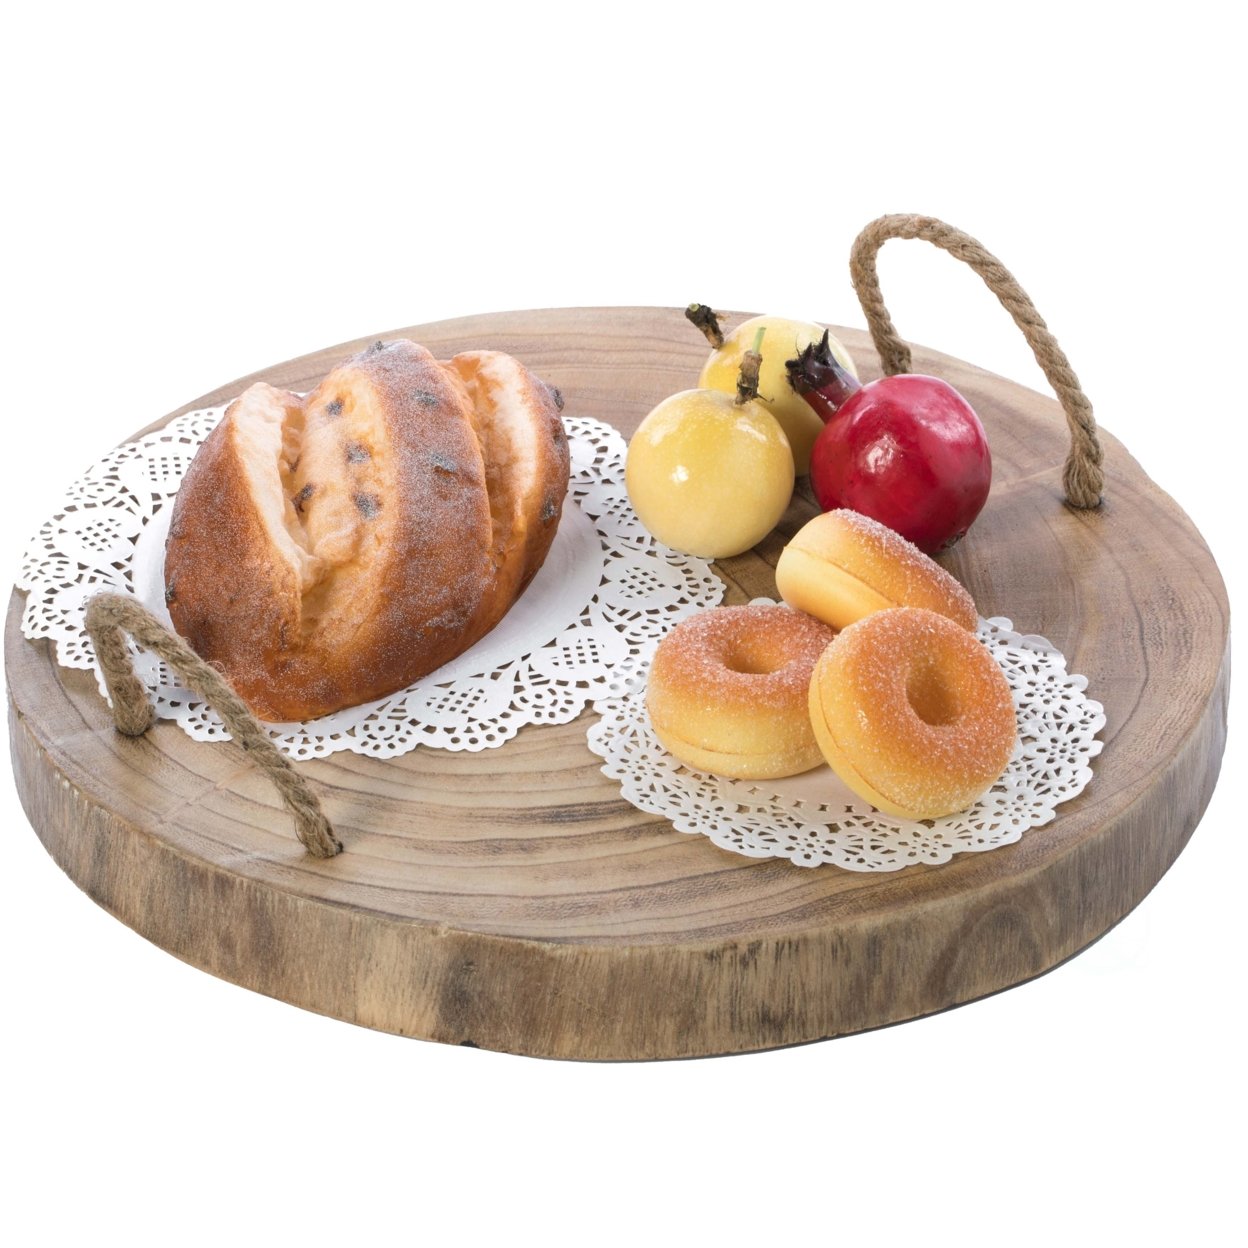 Wood Round Tray Serving Platter Board With Rope Handles